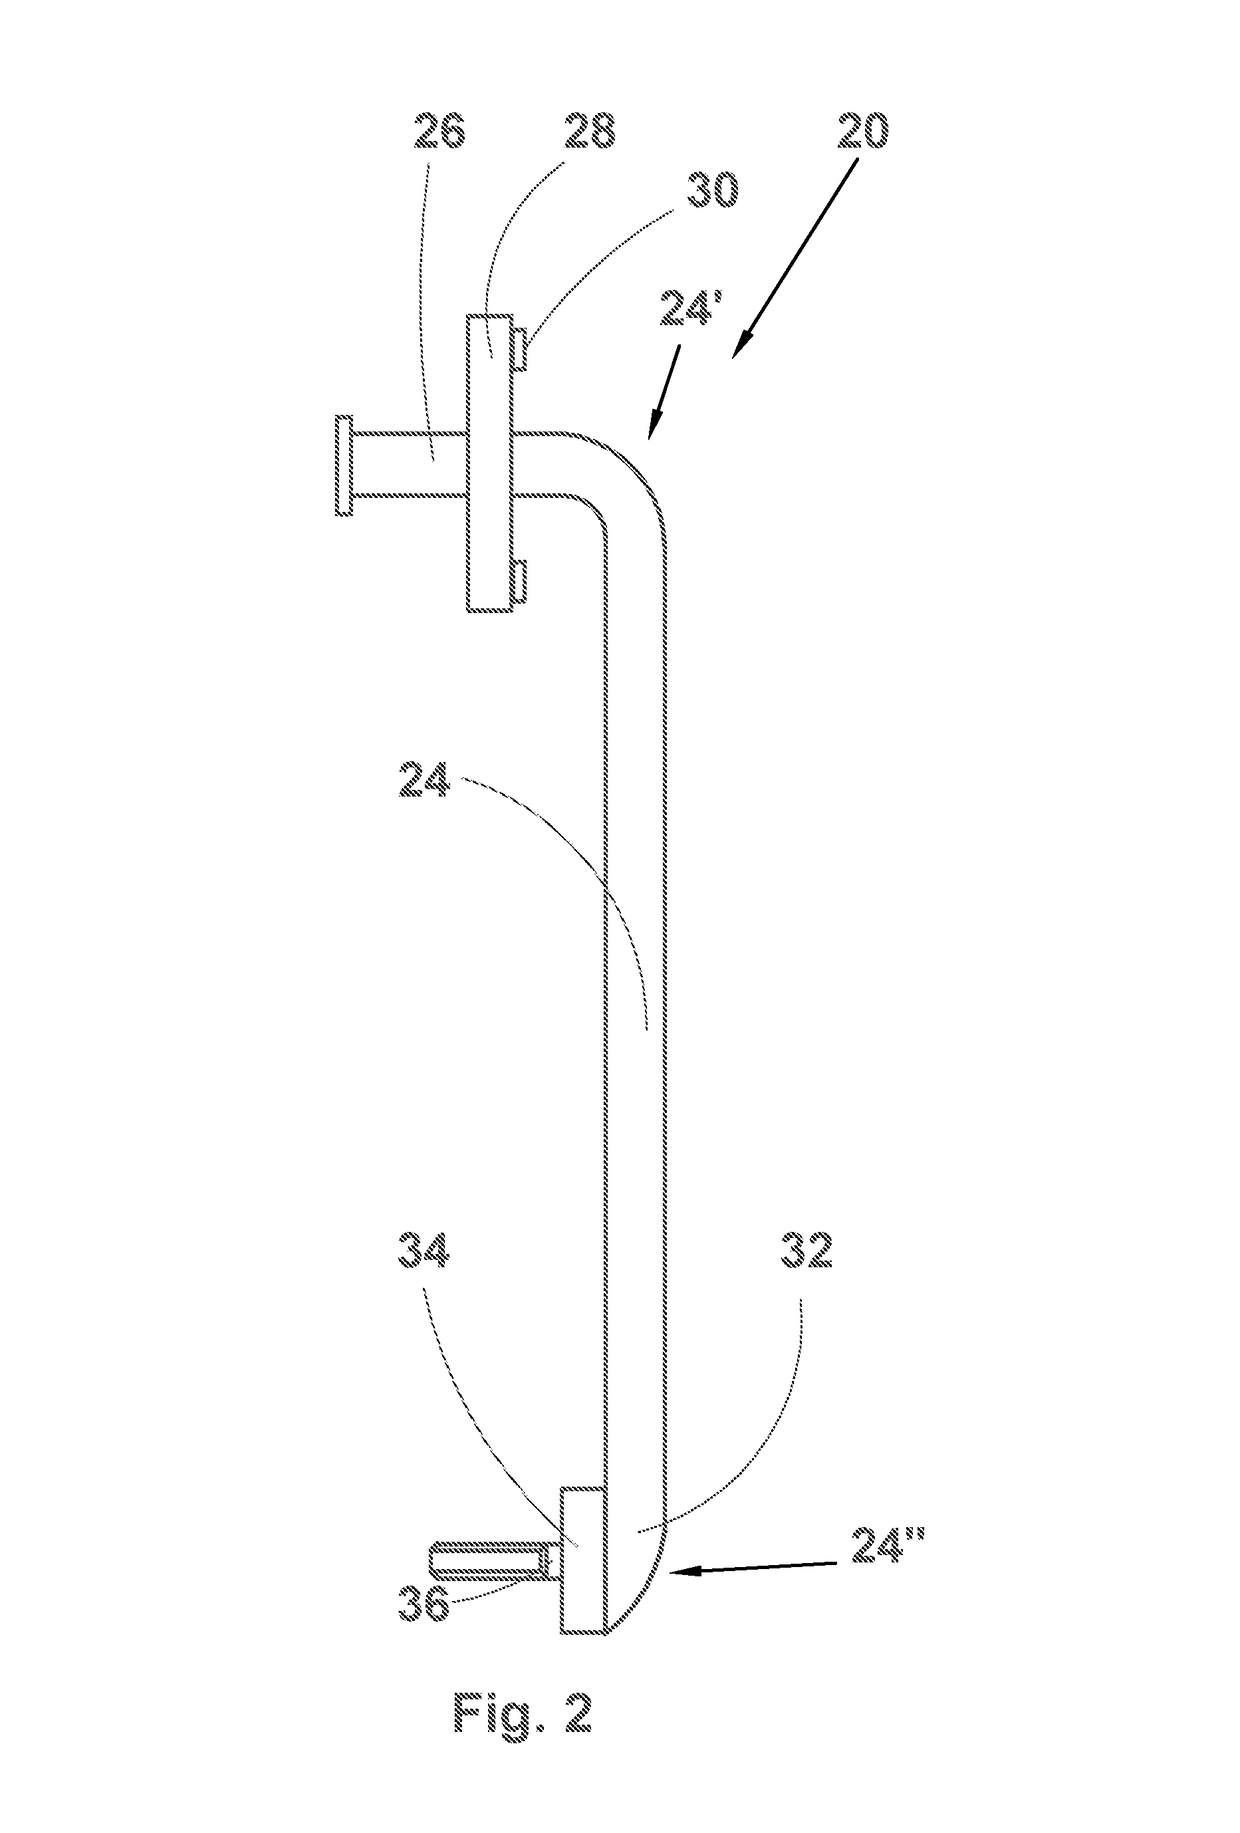 Probe for monitoring the surface level of a fluid in a vessel and a method of installing the probe in the vessel